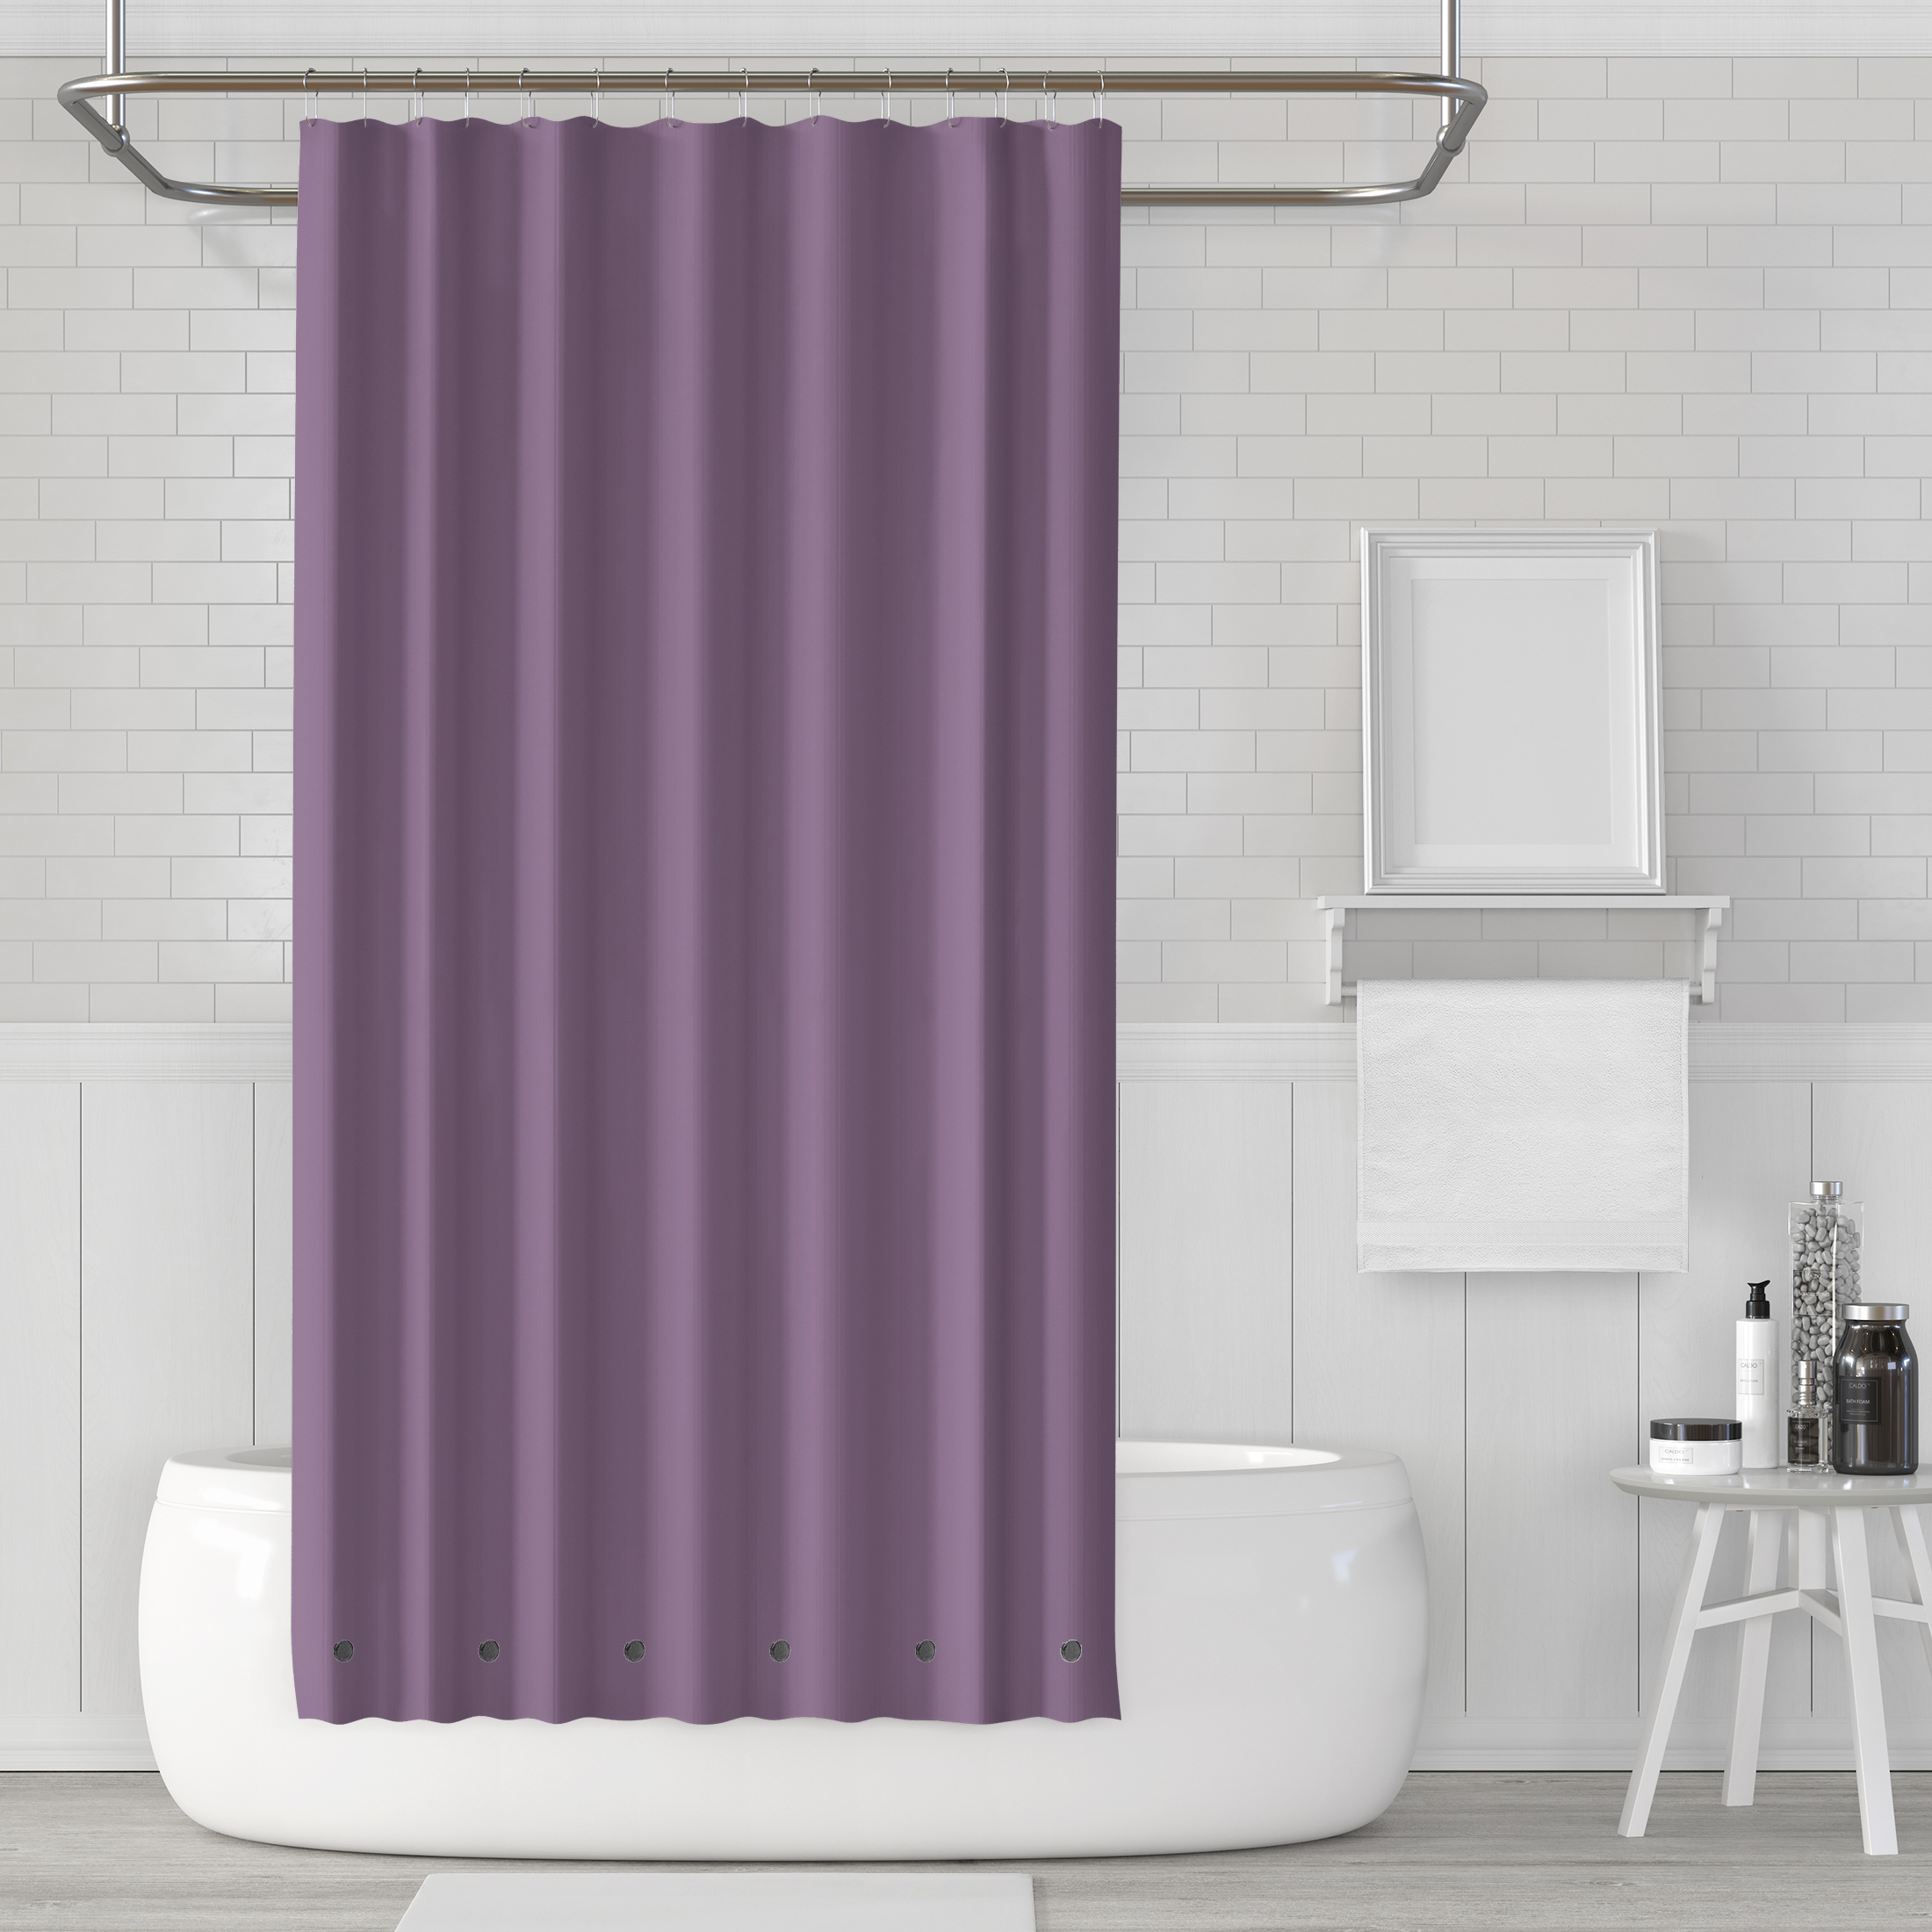 Heavy-Weight Magnetic Shower Curtain Liner - Purple